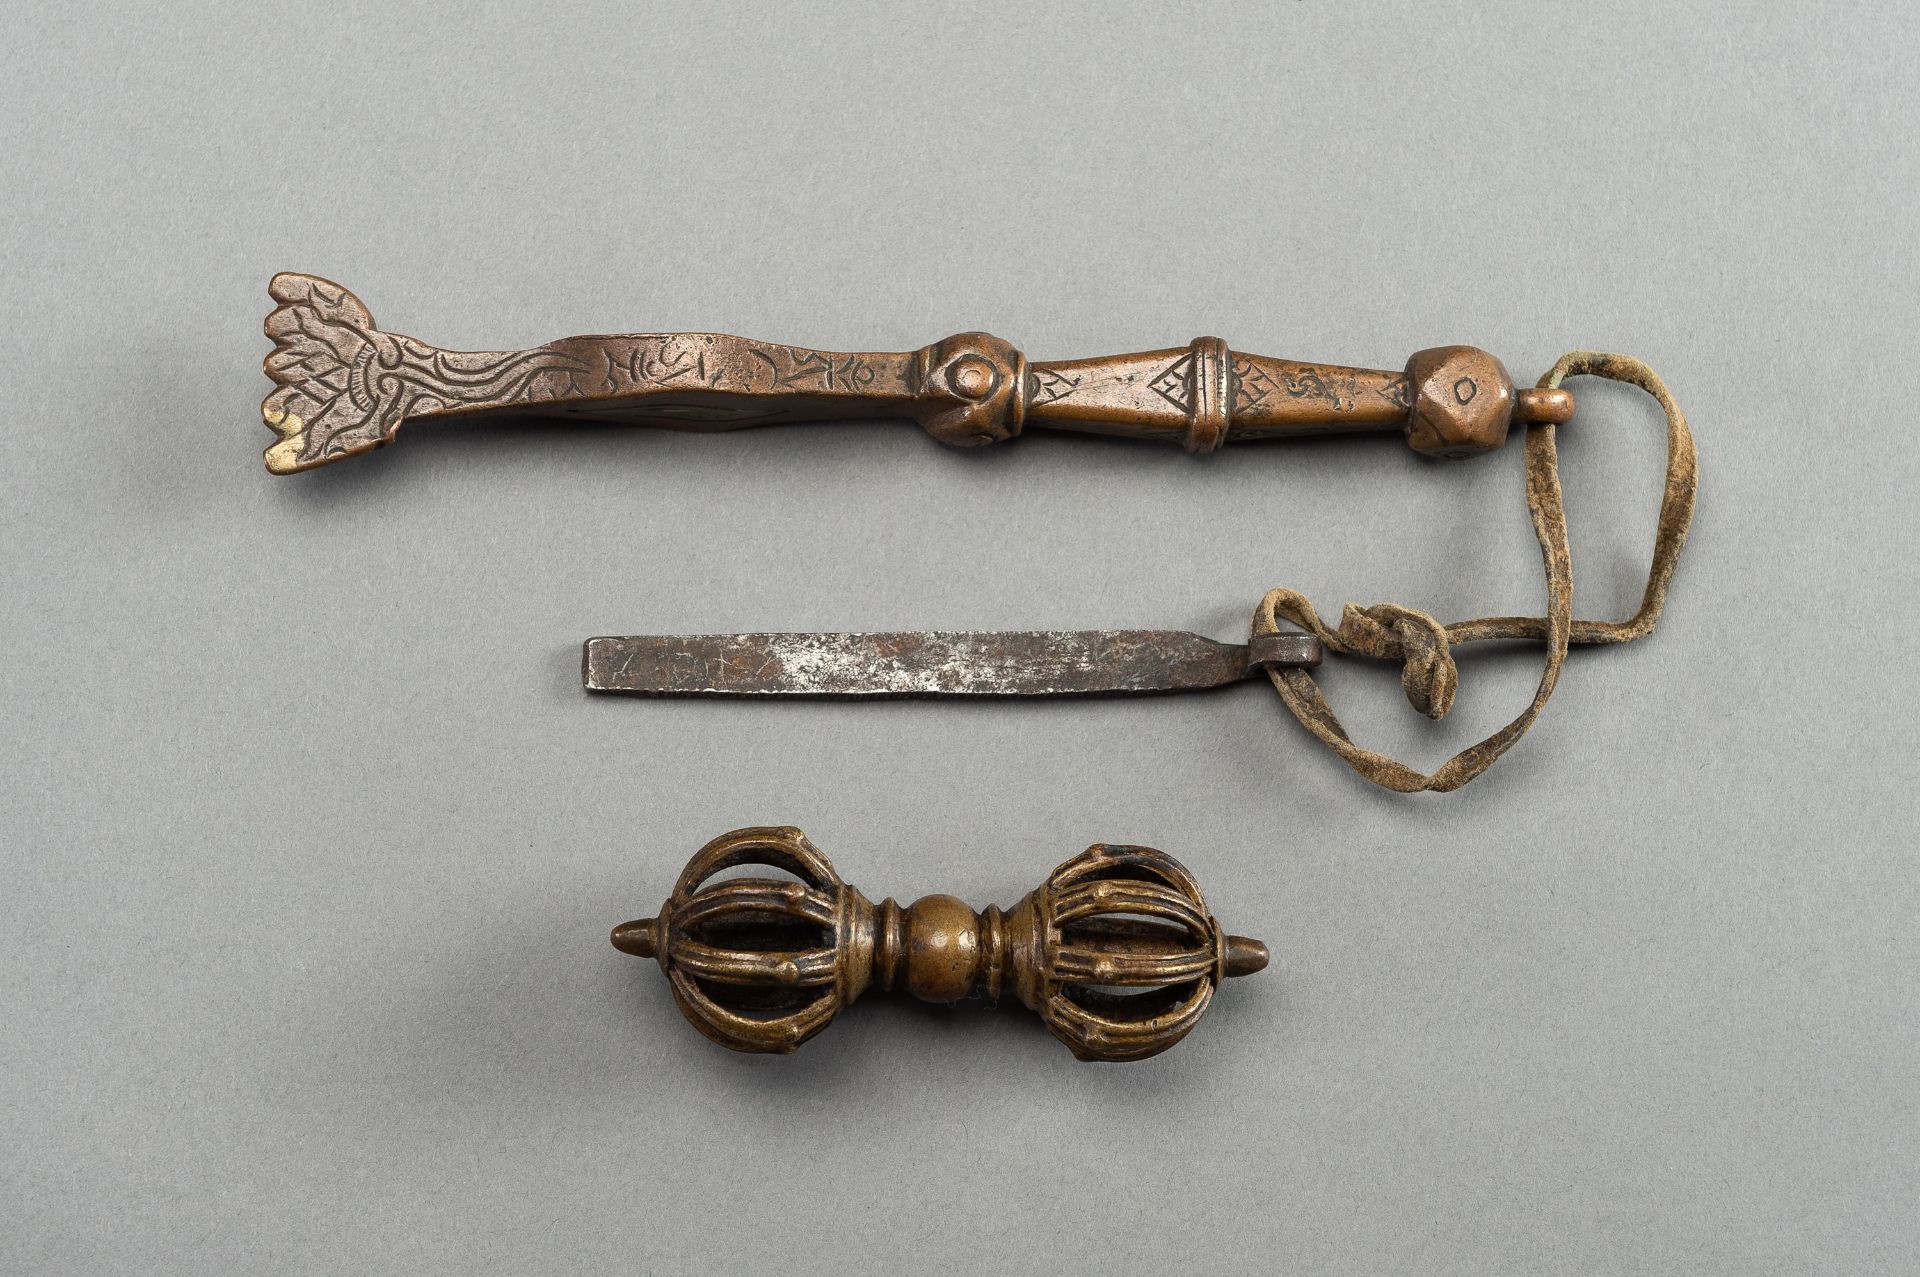 A BRONZE VAJRA AND TWO RITUAL INSTRUMENTS - Image 7 of 7